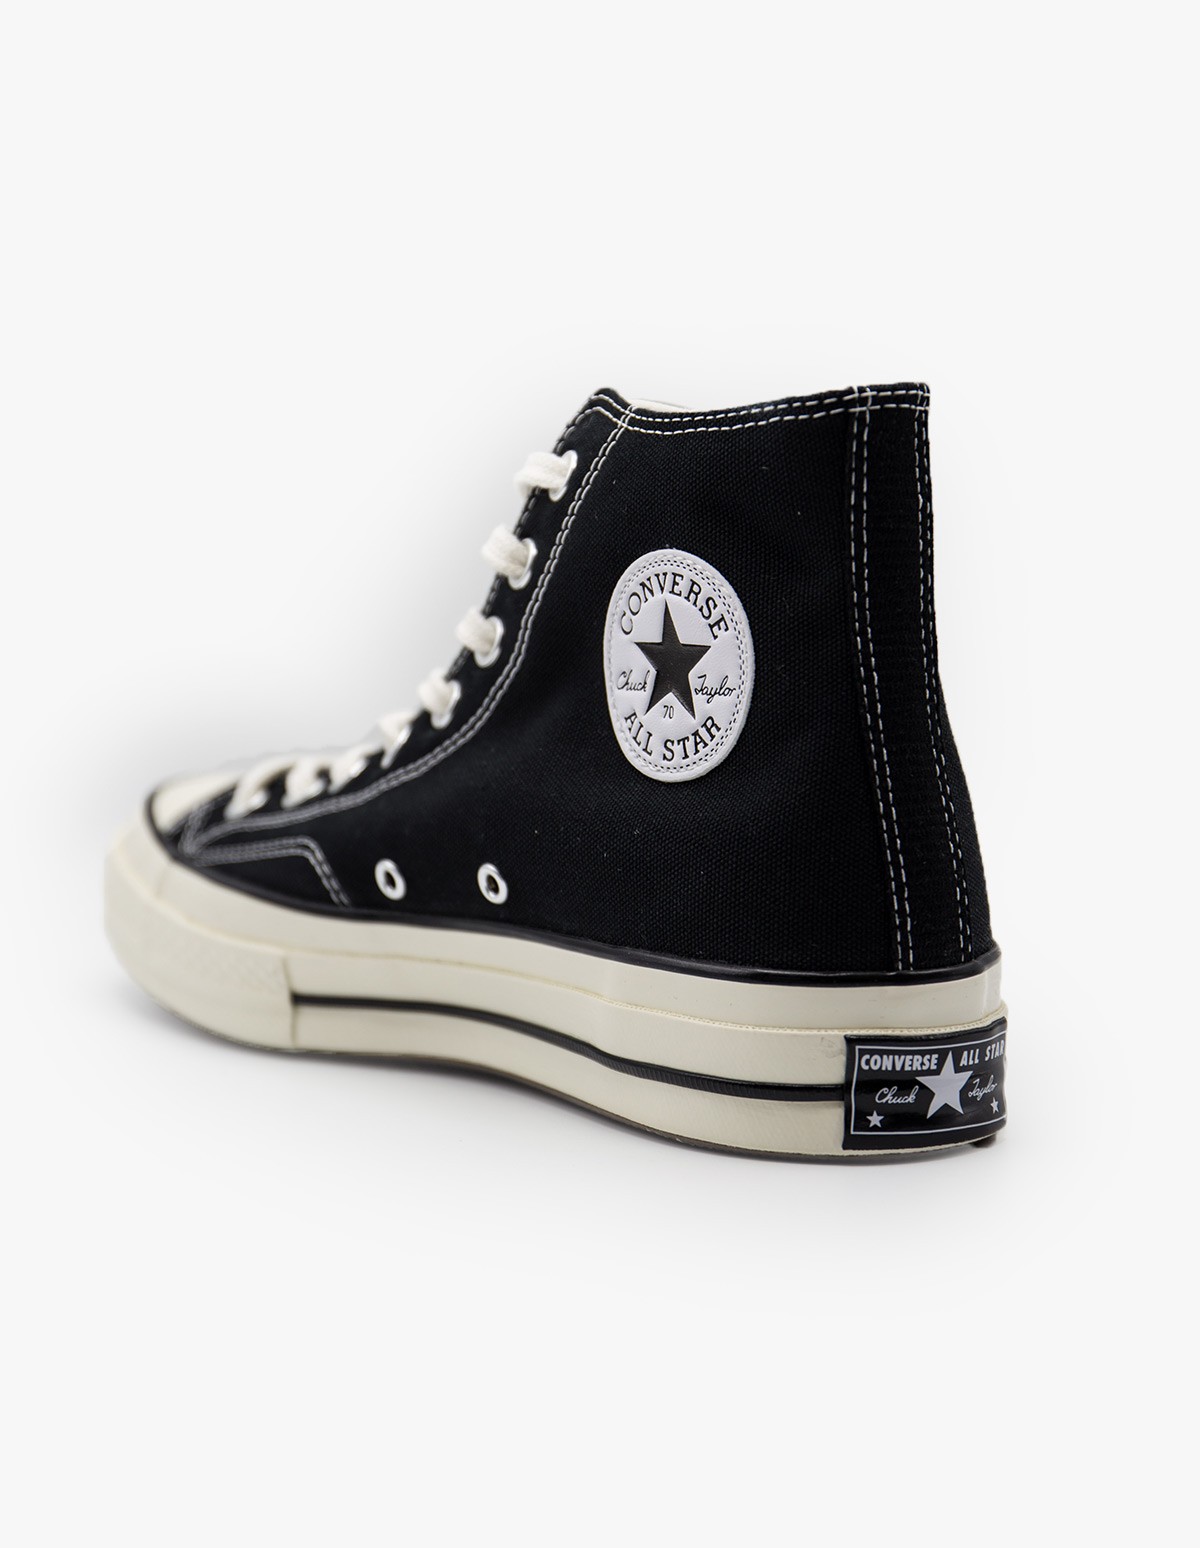 Converse - Chuck Taylor All Star '70 in Black | Afura Store